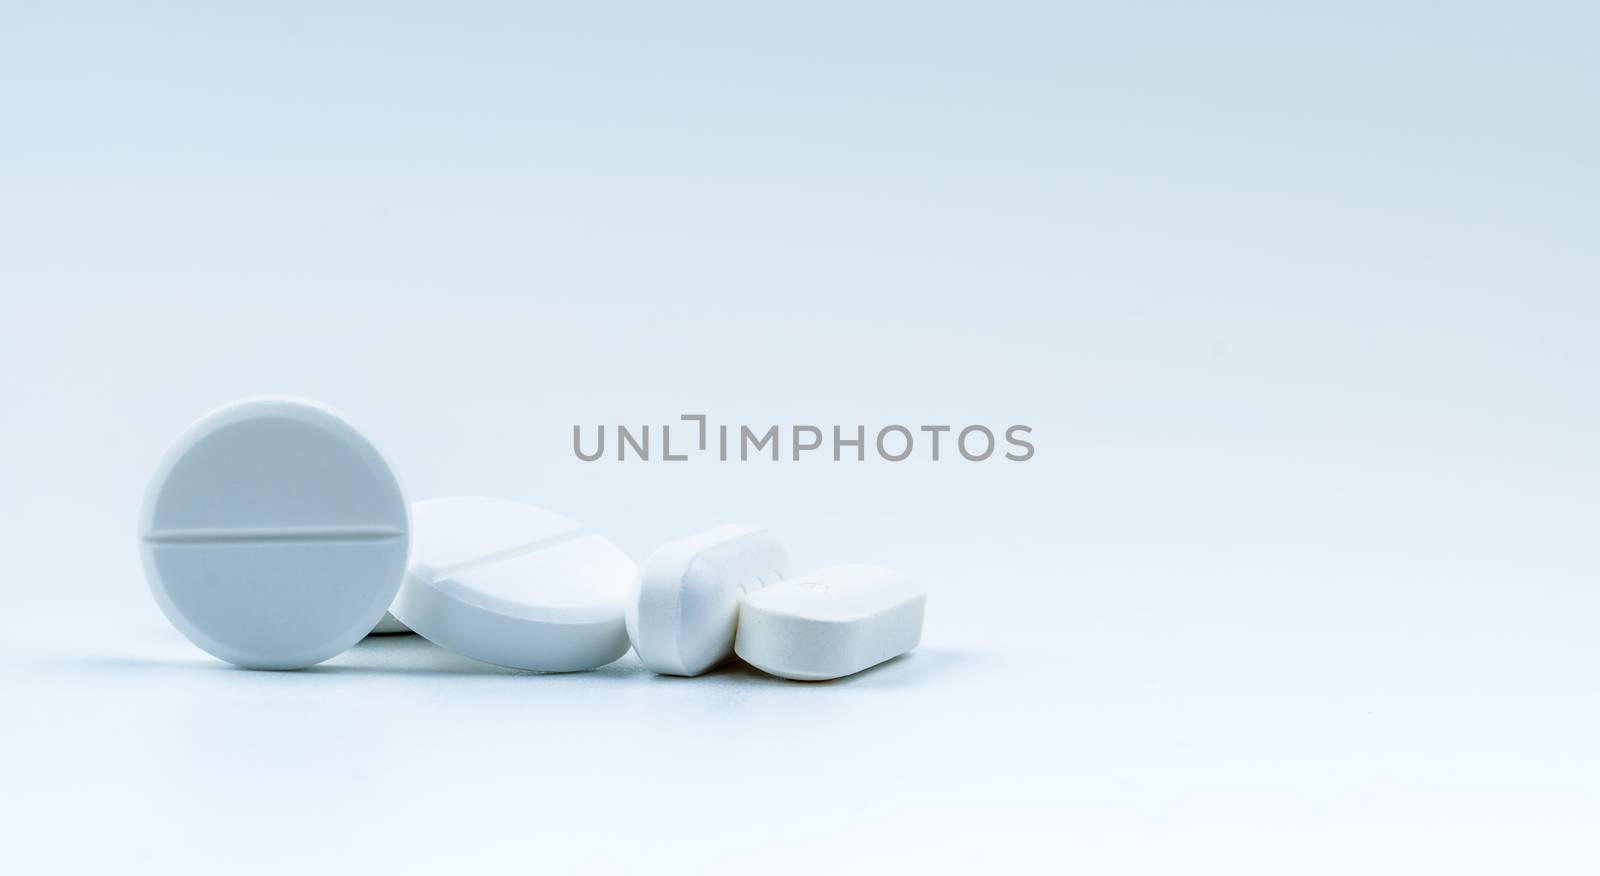 Pile of white round and oblong shape tablet pills isolated on white background. Pharmaceutical industry. Pharmacy or drugstore sign and symbol. Global healthcare concept. Health and pharmacology. by Fahroni